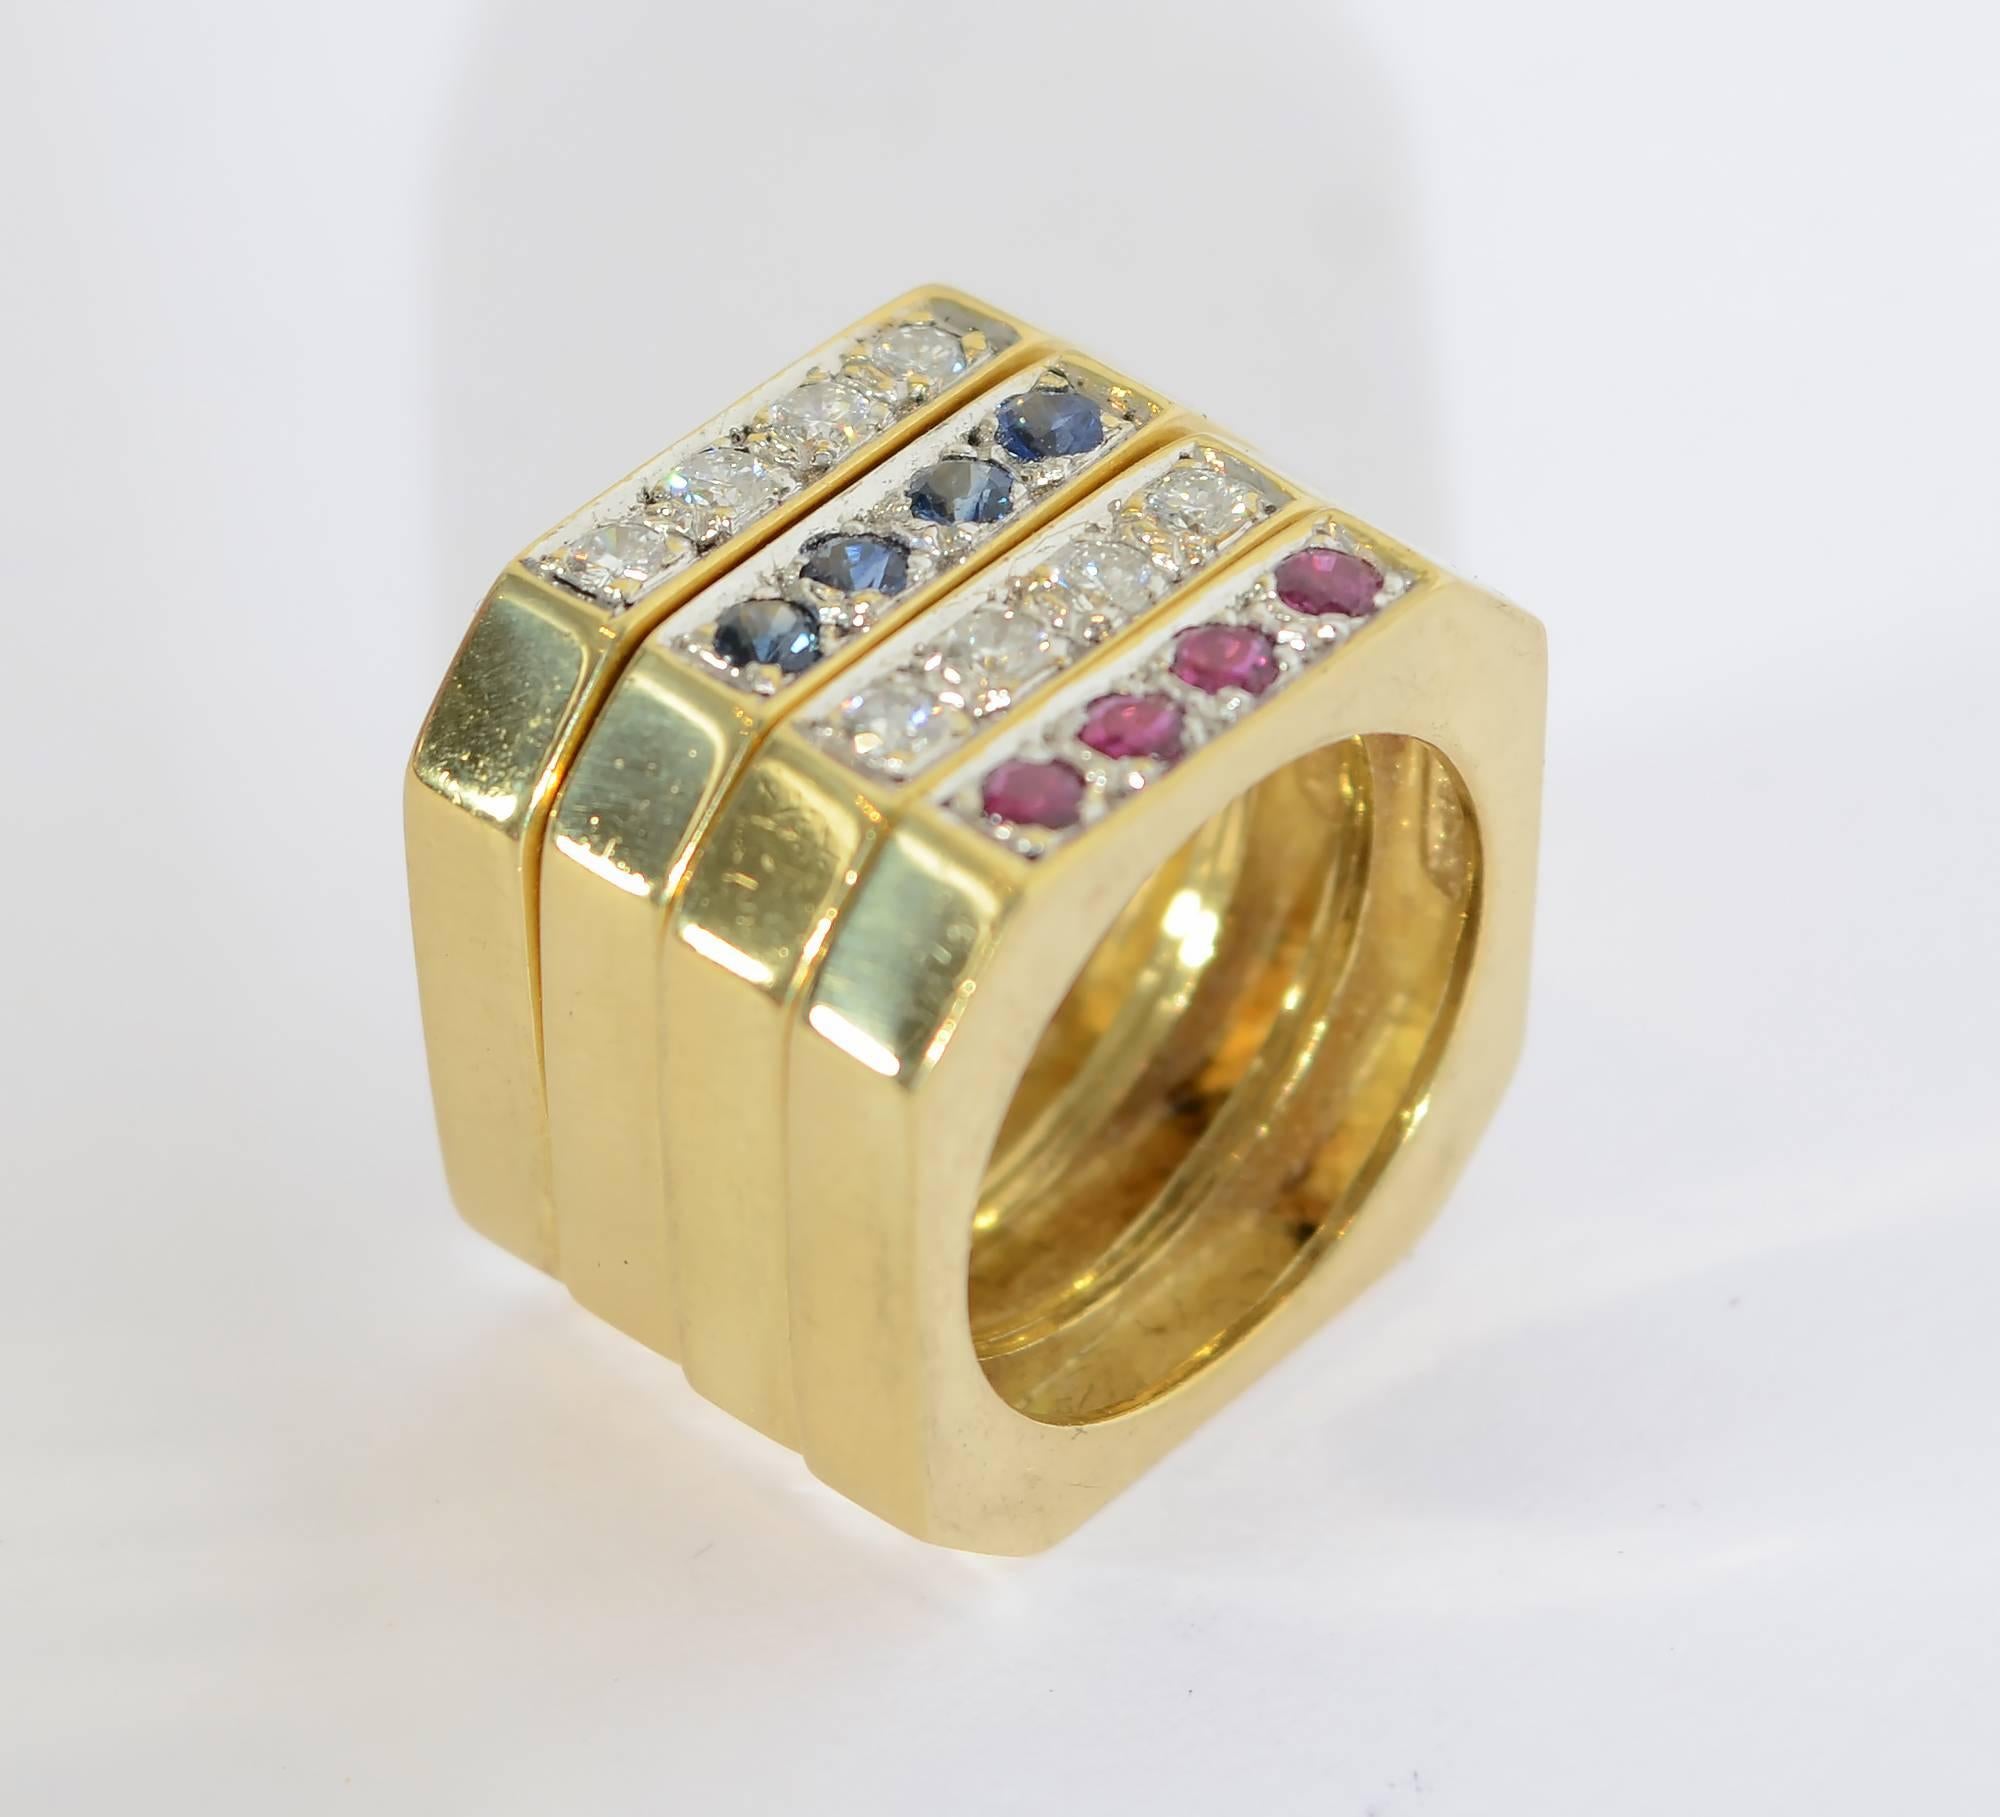 Set of four octagonal shaped stacking rings by David Webb. Two of the rings have diamonds; one is set with rubies and one with sapphires. They are wonderfully versatile in that they can be worn in multiple combinations. The rings are size 6.